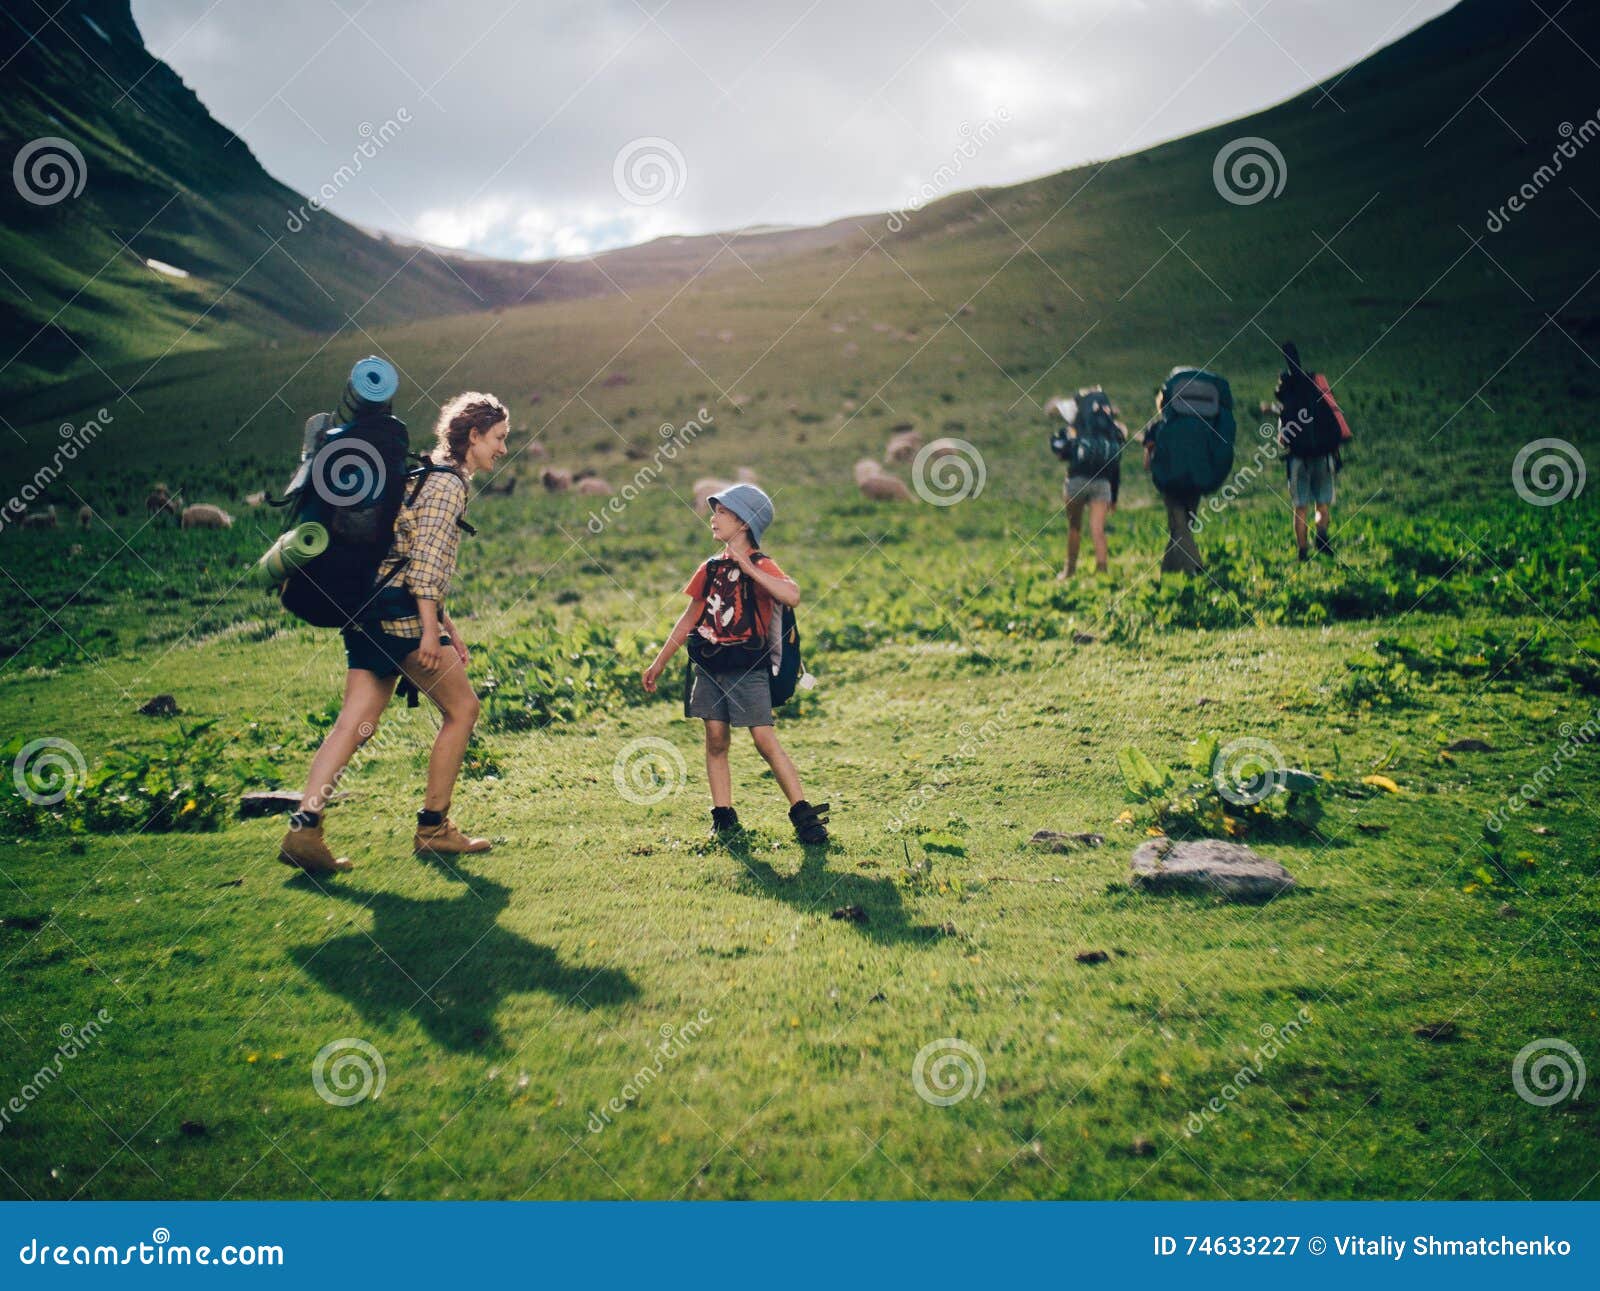 family hiking in the mountains. a young happy mother and her son take a hike together in the mountains on a beautiful